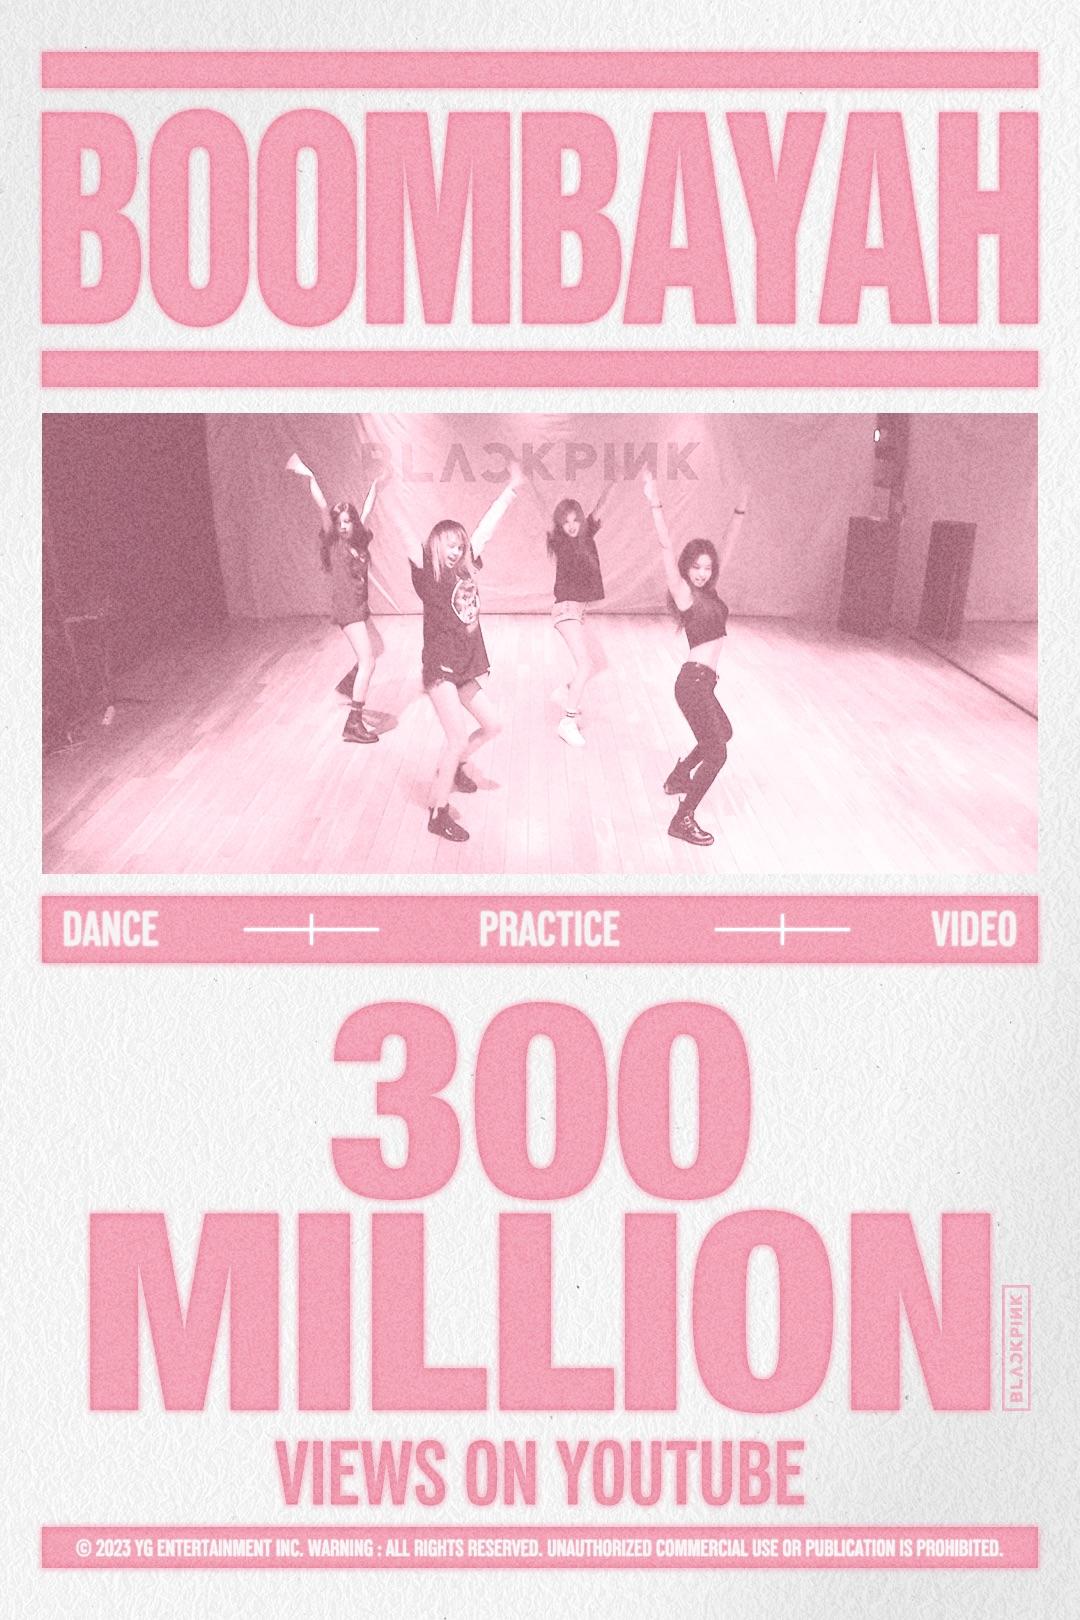 231011 BLACKPINK - ‘붐바야 (BOOMBAYAH)’ DANCE PRACTICE VIDEO hits 300 MILLION VIEWS on Youtube! [Official Poster]